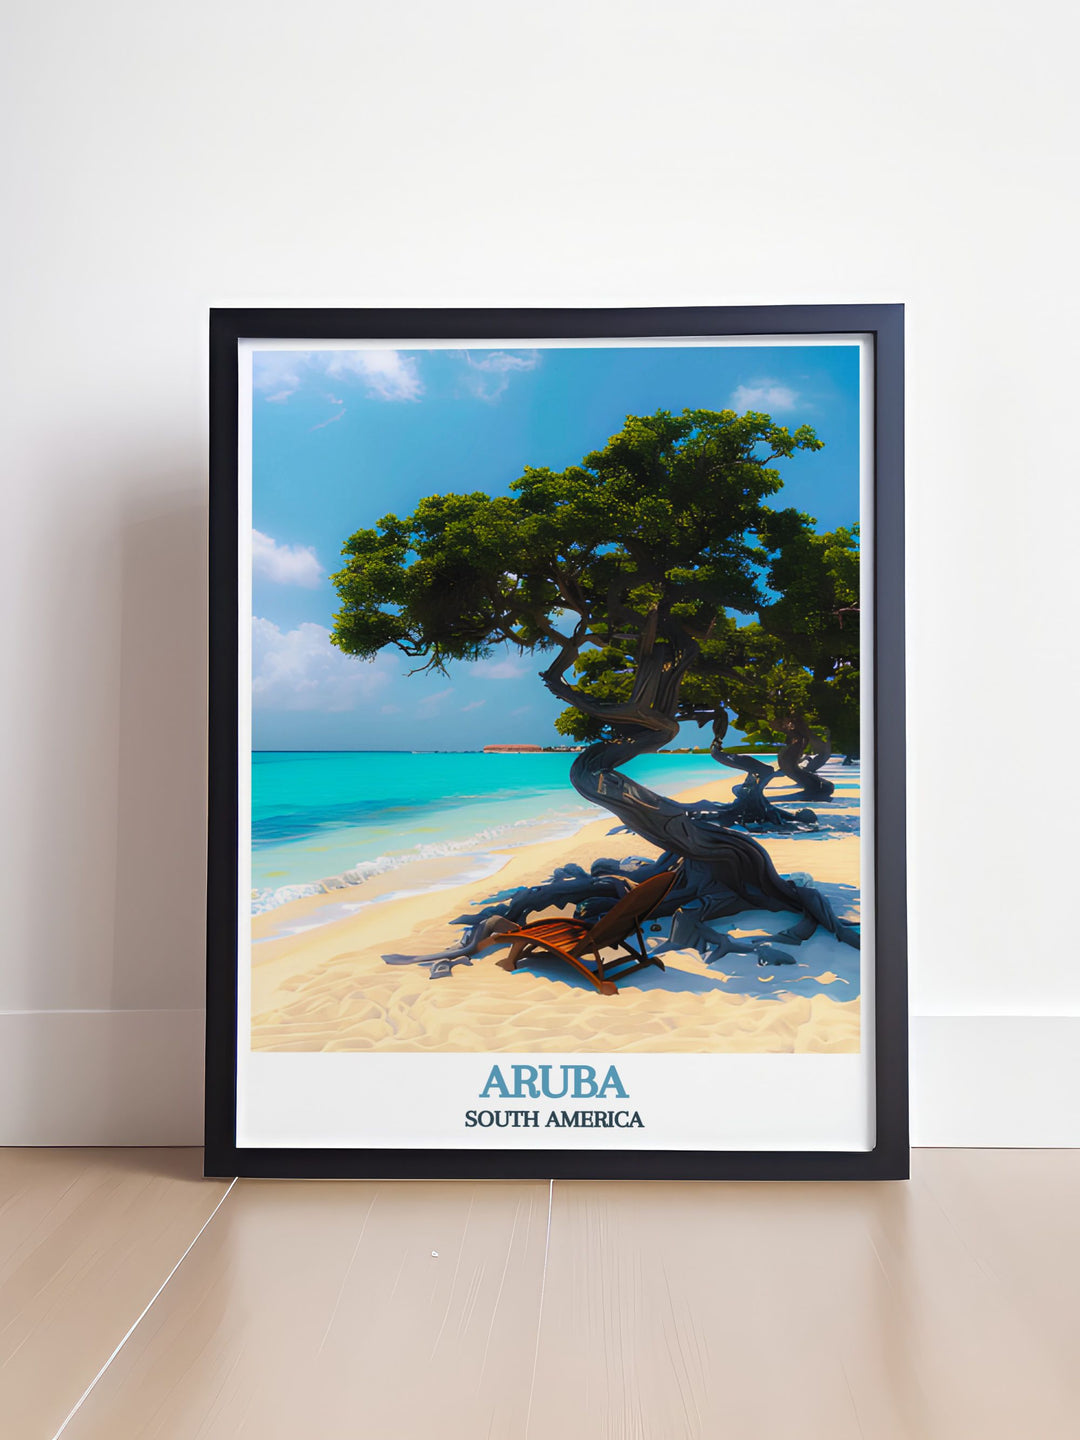 Aruba poster depicting the natural wonders of Eagle Beach bringing the essence of the Caribbean island into your home and serving as a beautiful reminder of your travels or love for nature with its exquisite fine line print quality